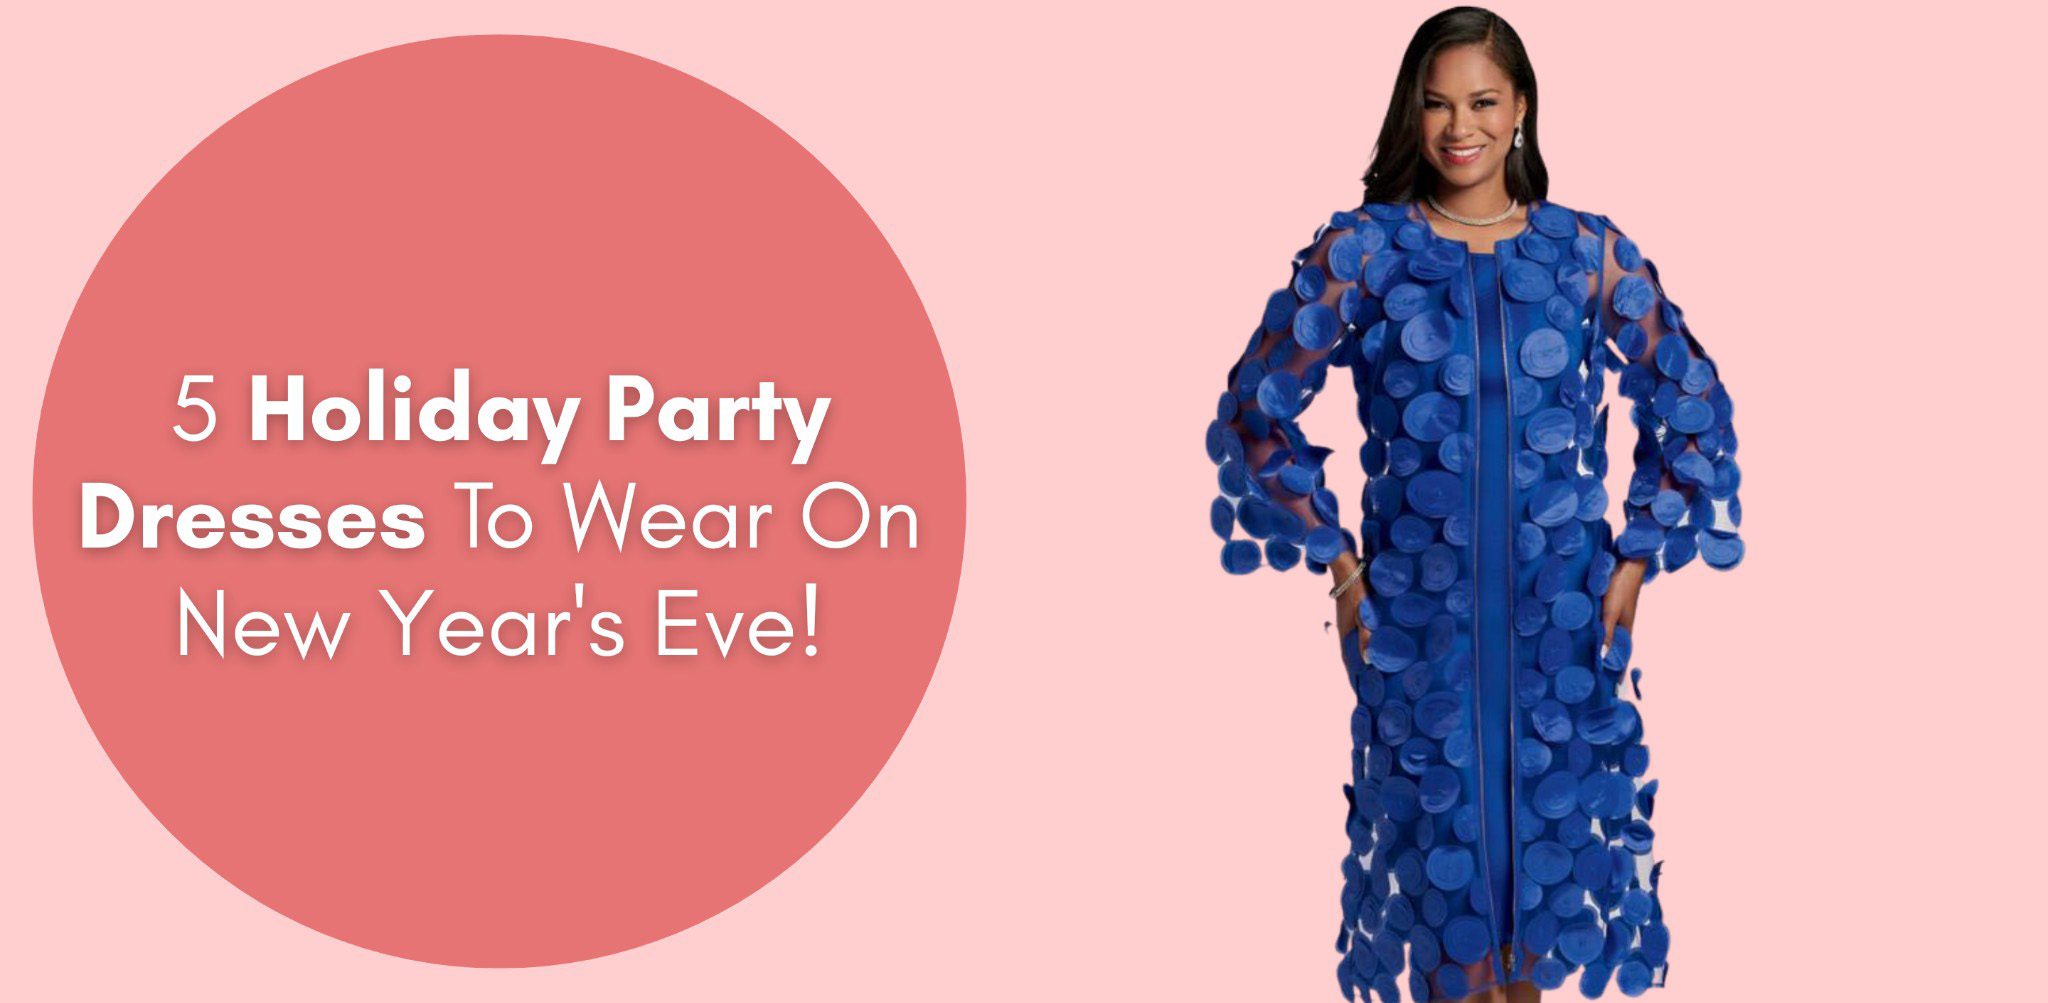 5 Holiday Party Dresses To Wear On New Year’s Eve!